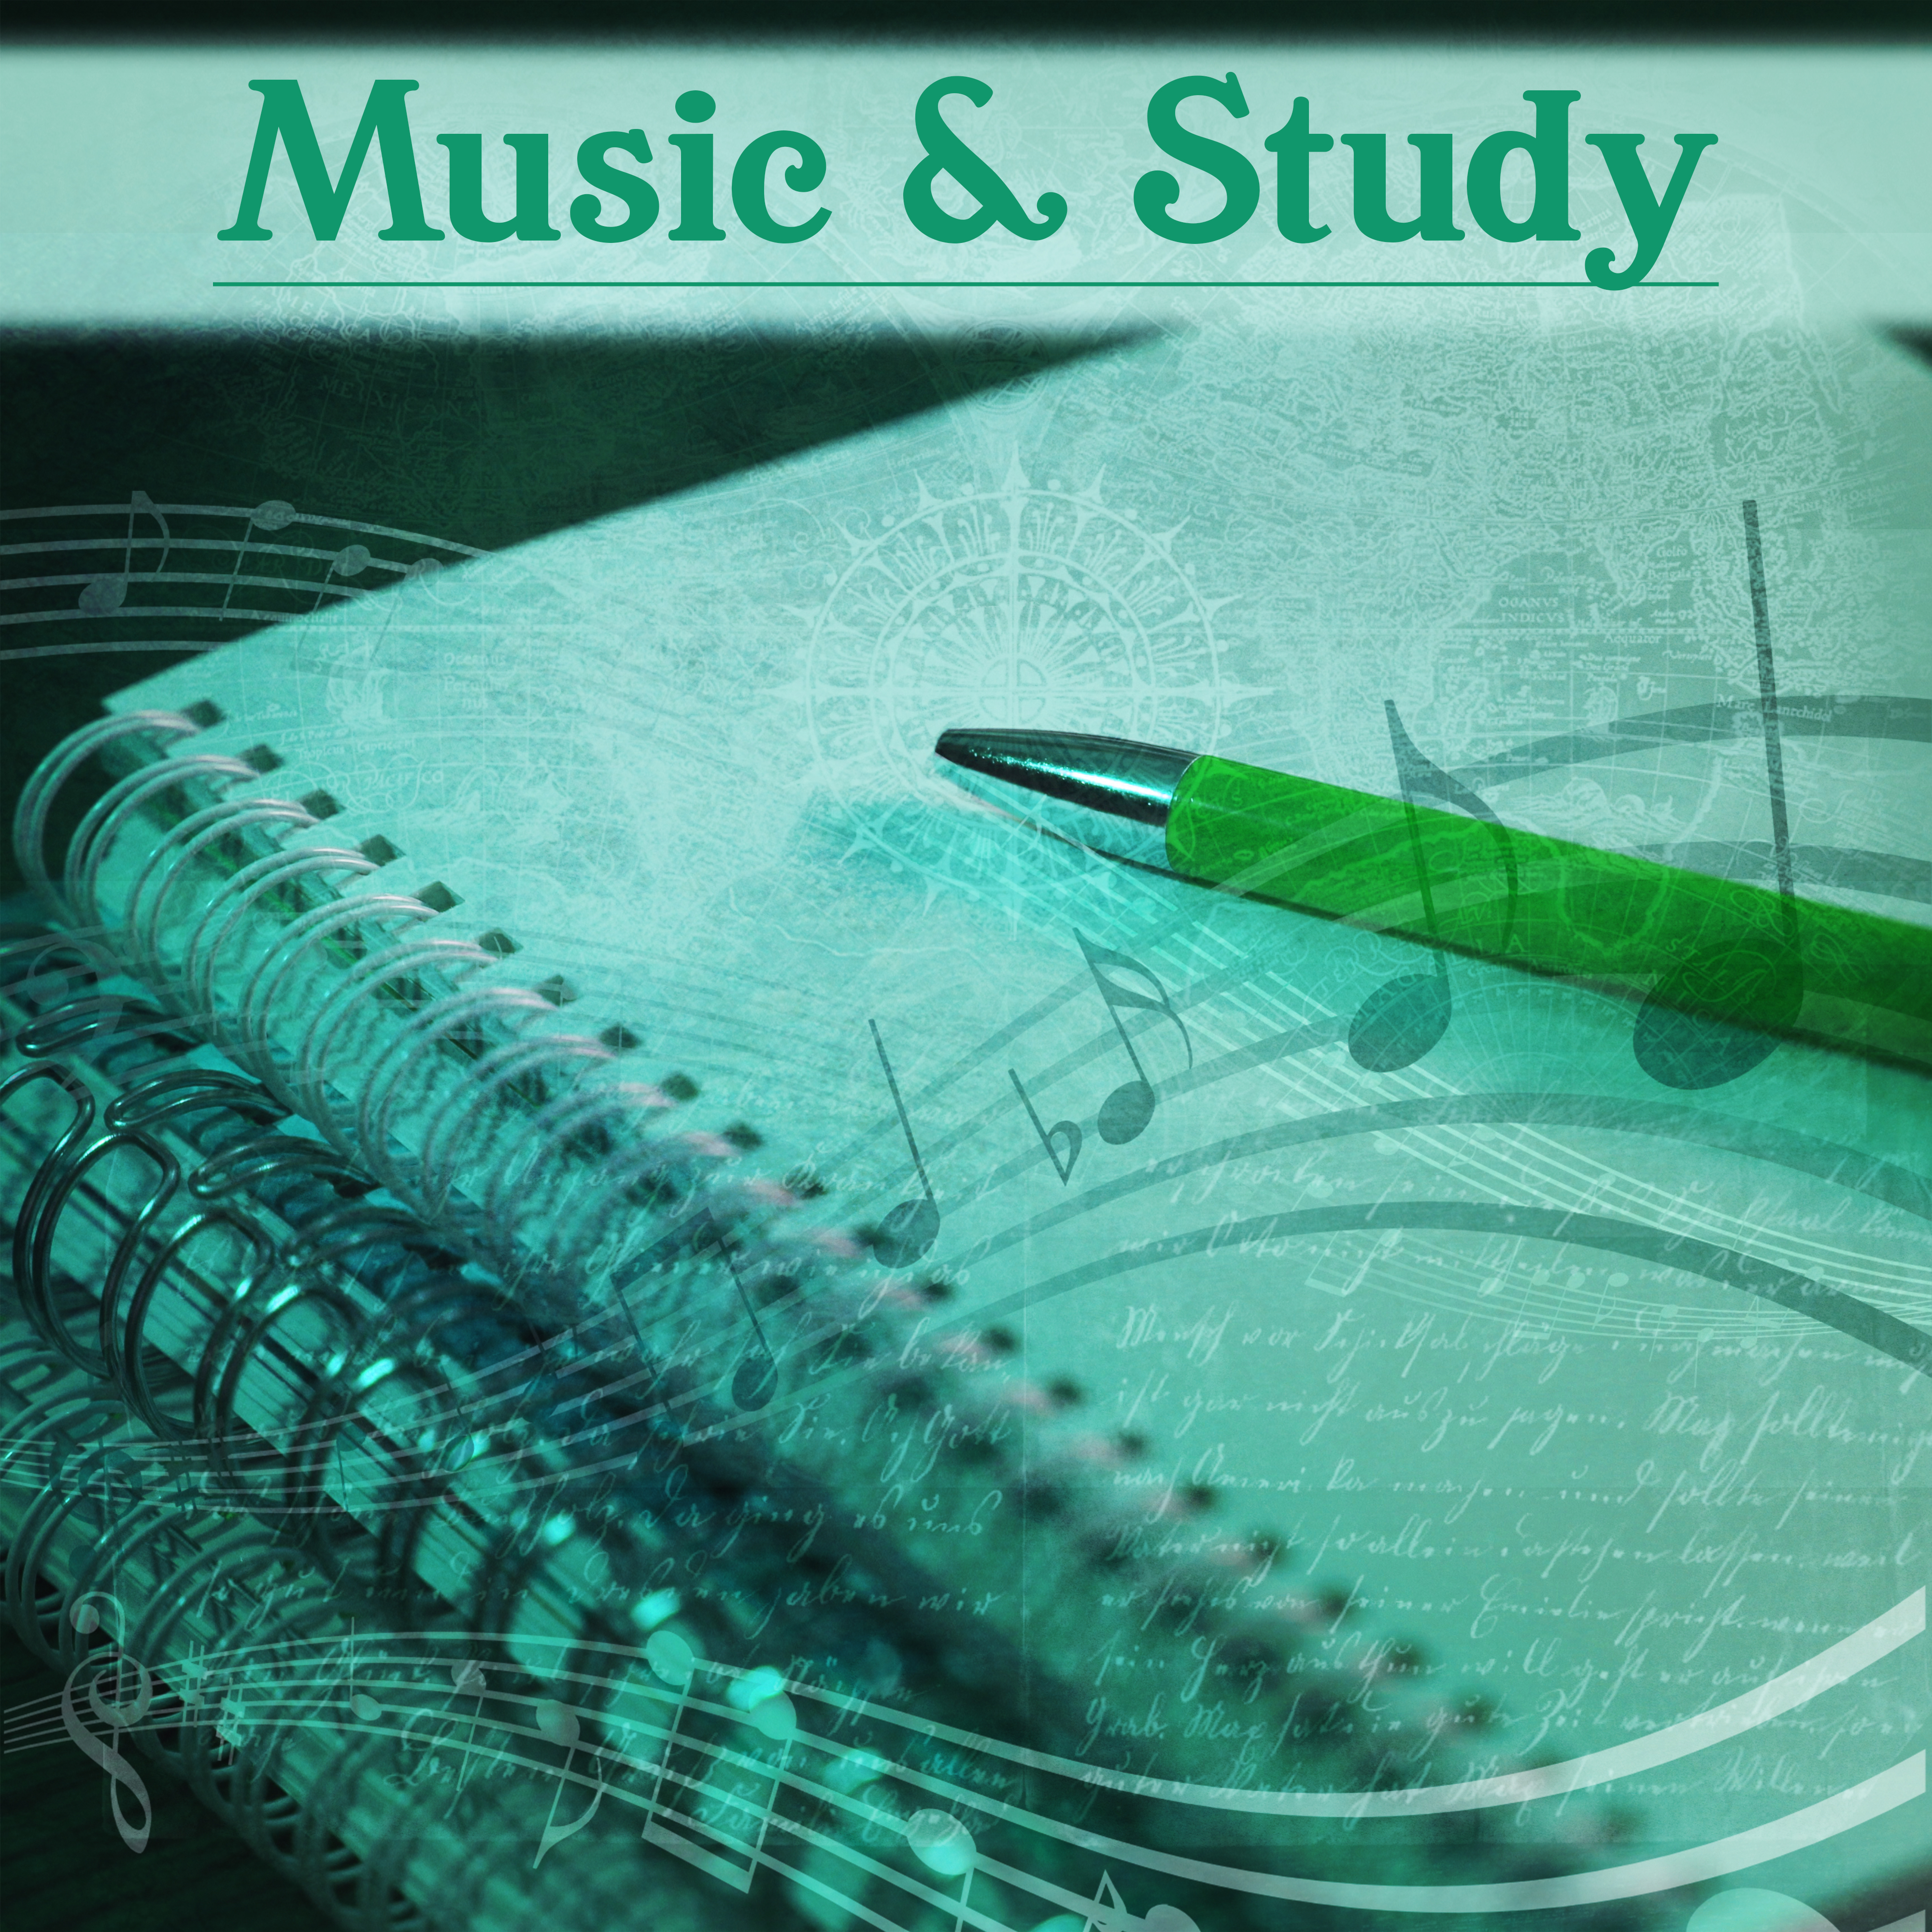 Music  Study  Classical Sounds for Learning, Songs for Mind, Easy Work, Bach, Faster Focusing